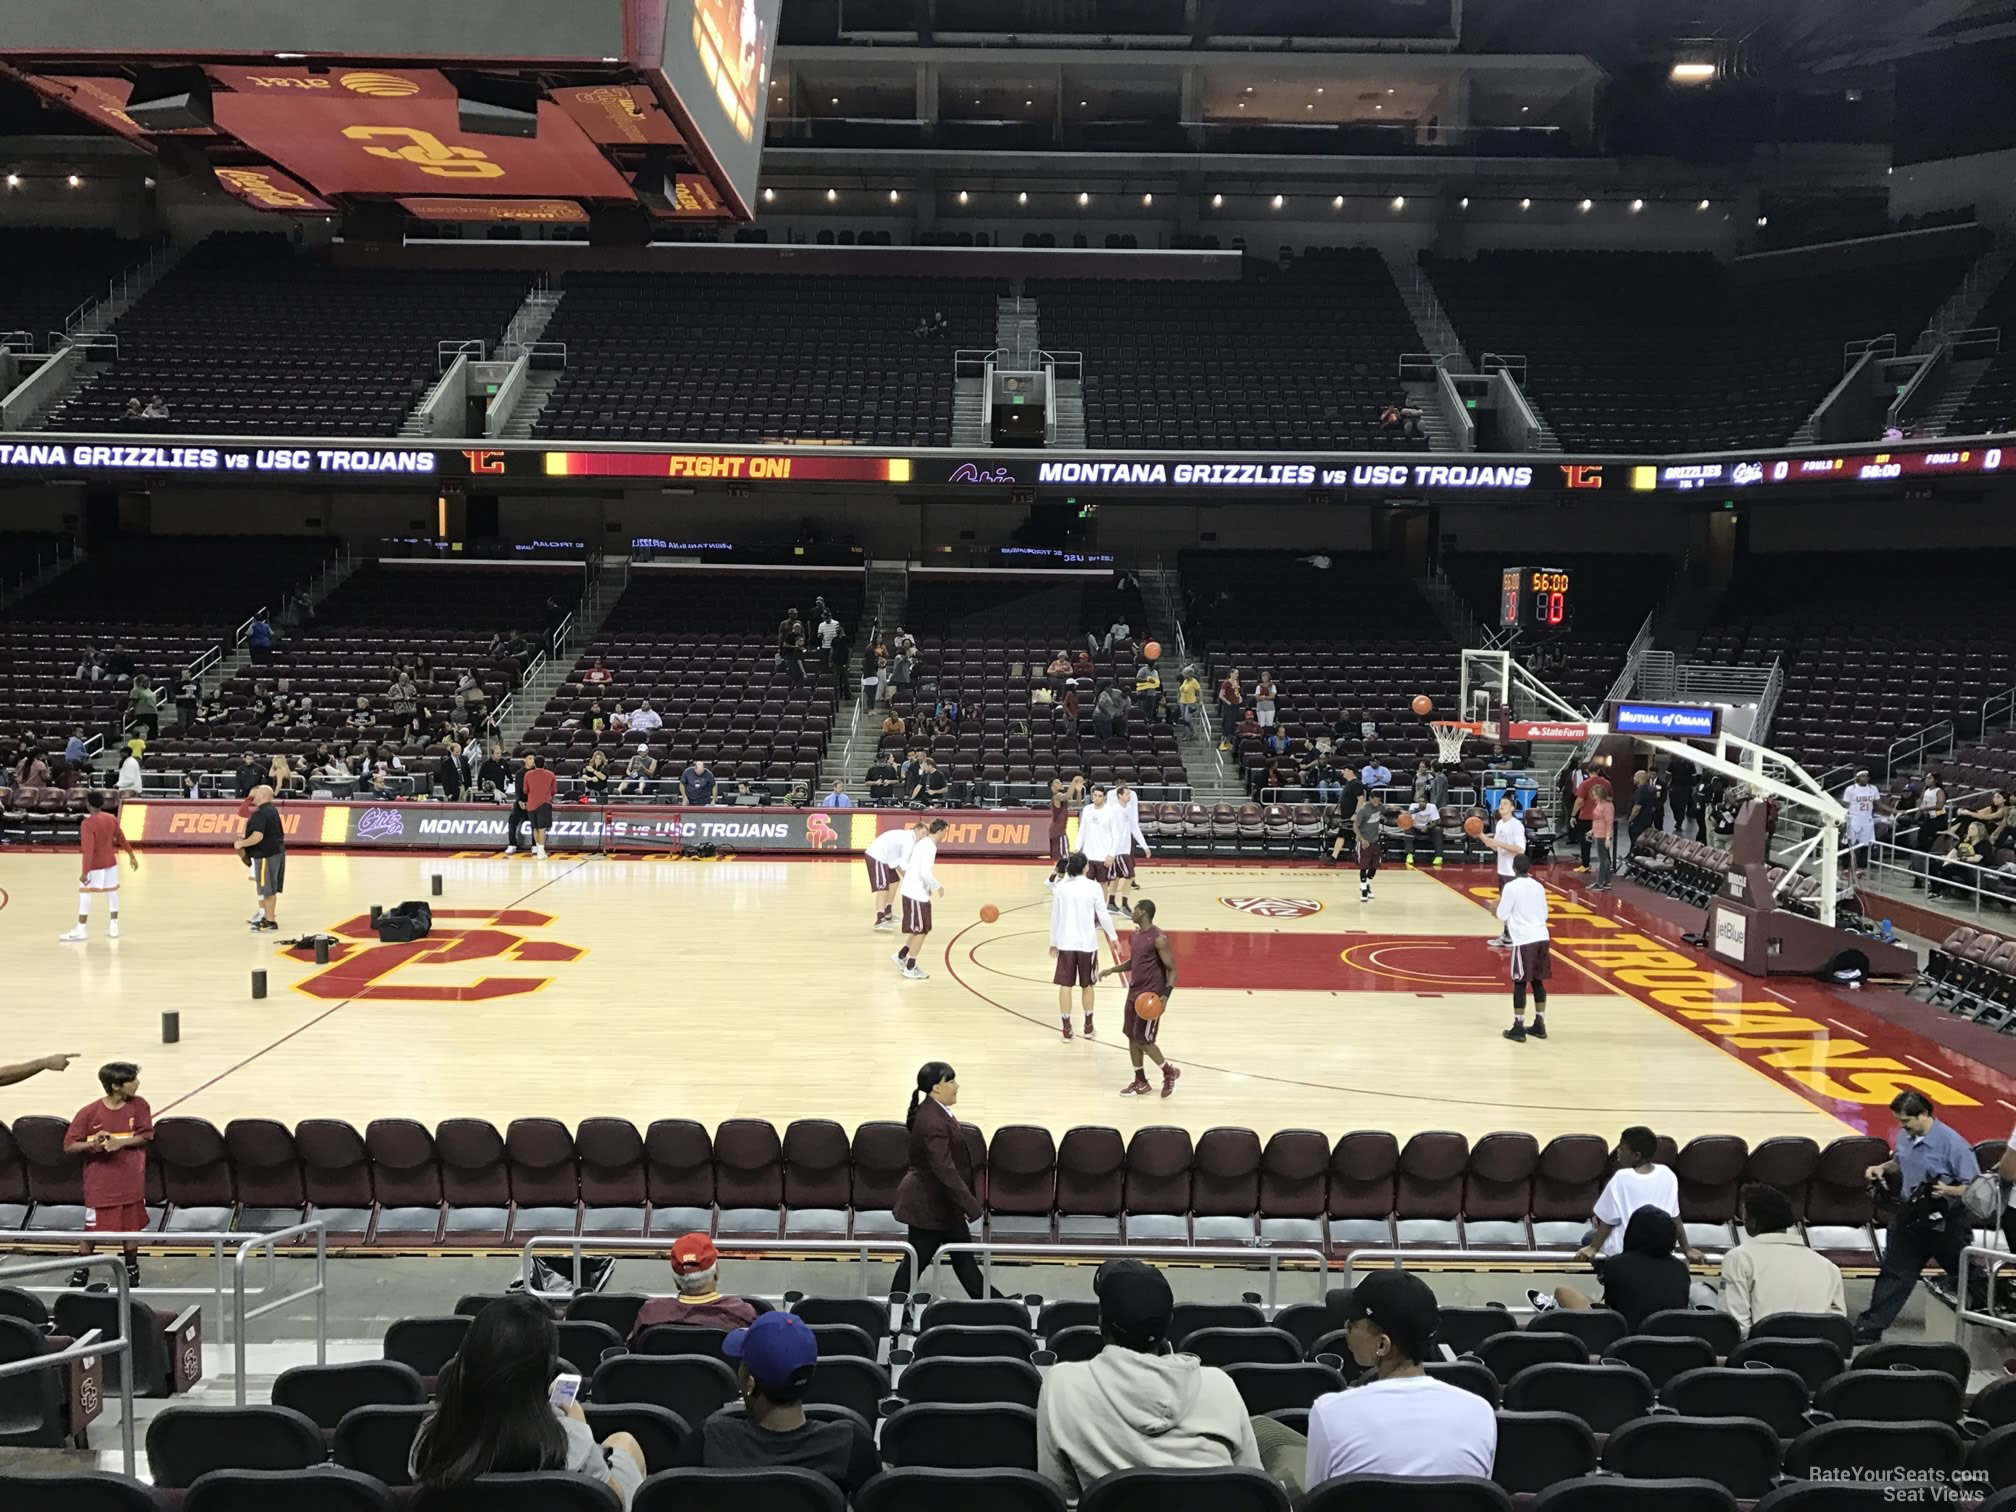 section 105, row 10 seat view  - galen center